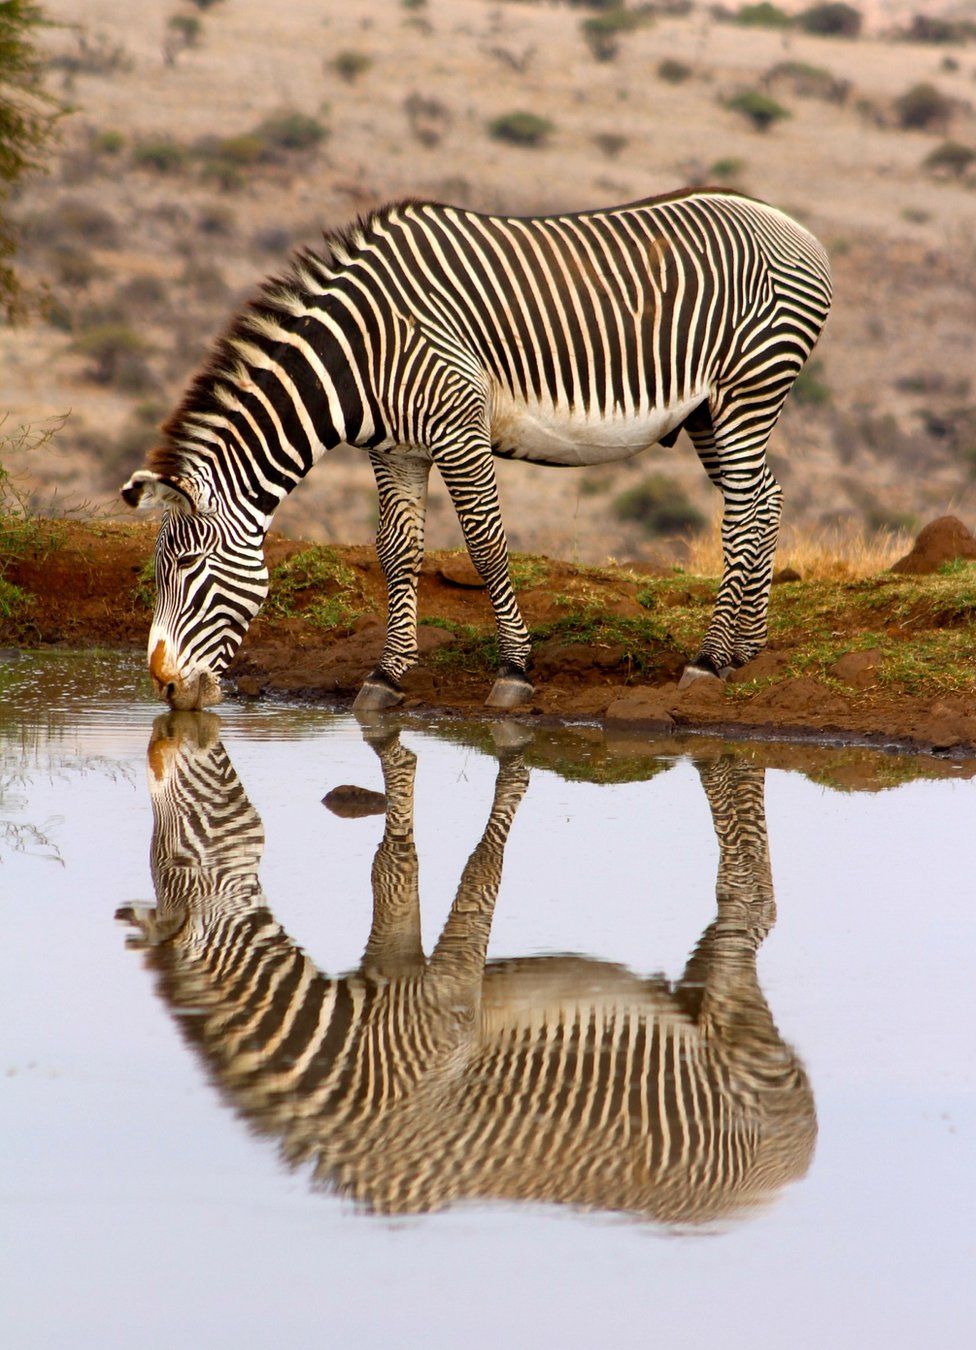 Zebra and its reflection in water